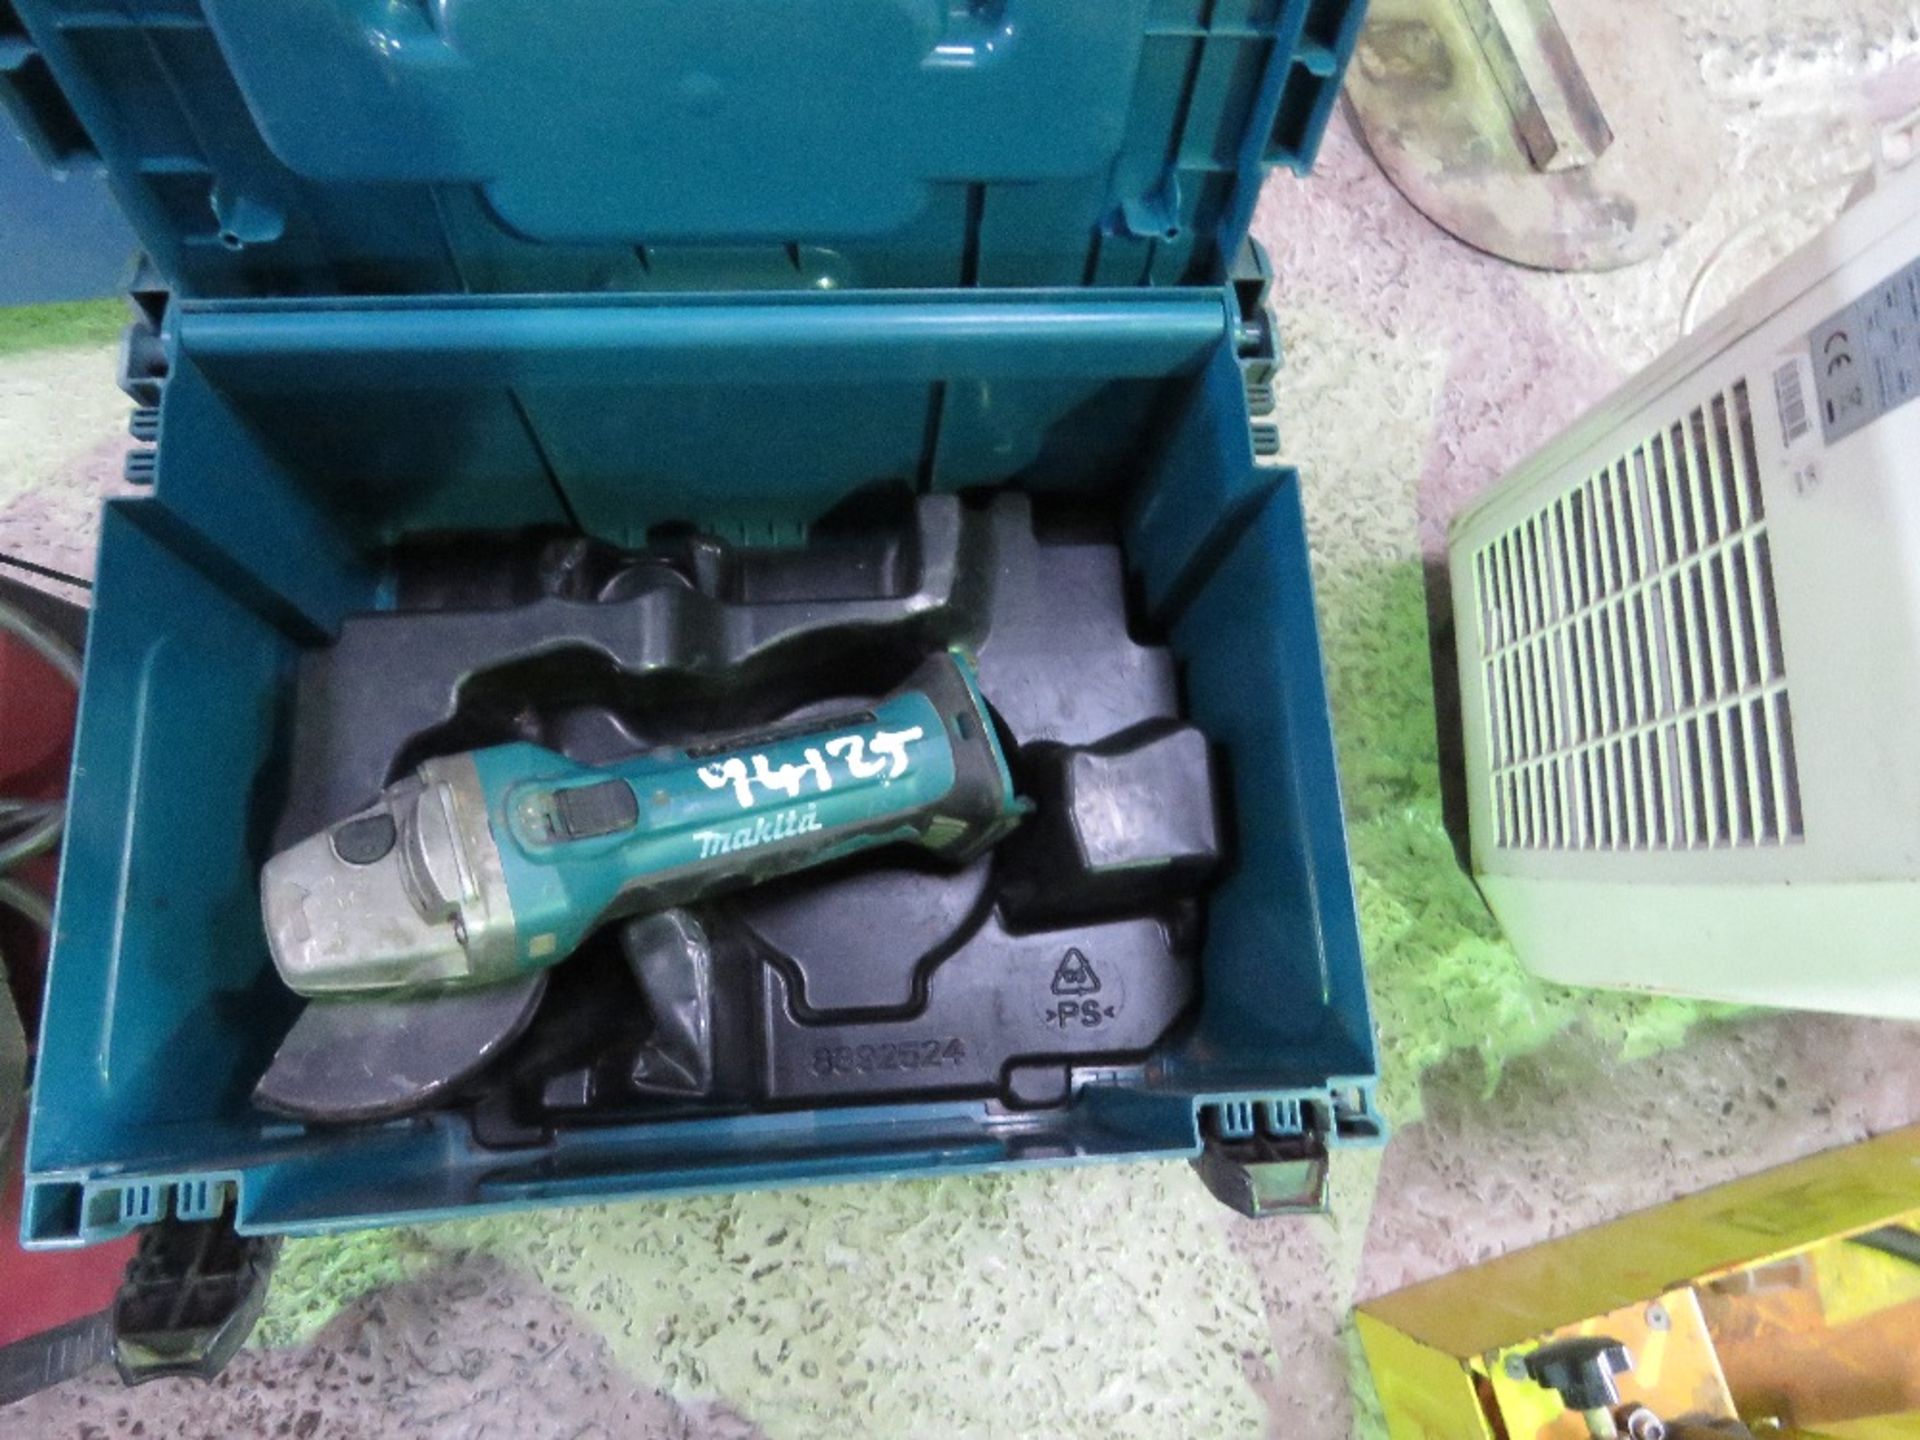 2 X MAKITA BOXED TOOLS: BATTERY NUT GUN AND GRINDER, NO BATTERIES/CHARGERS.